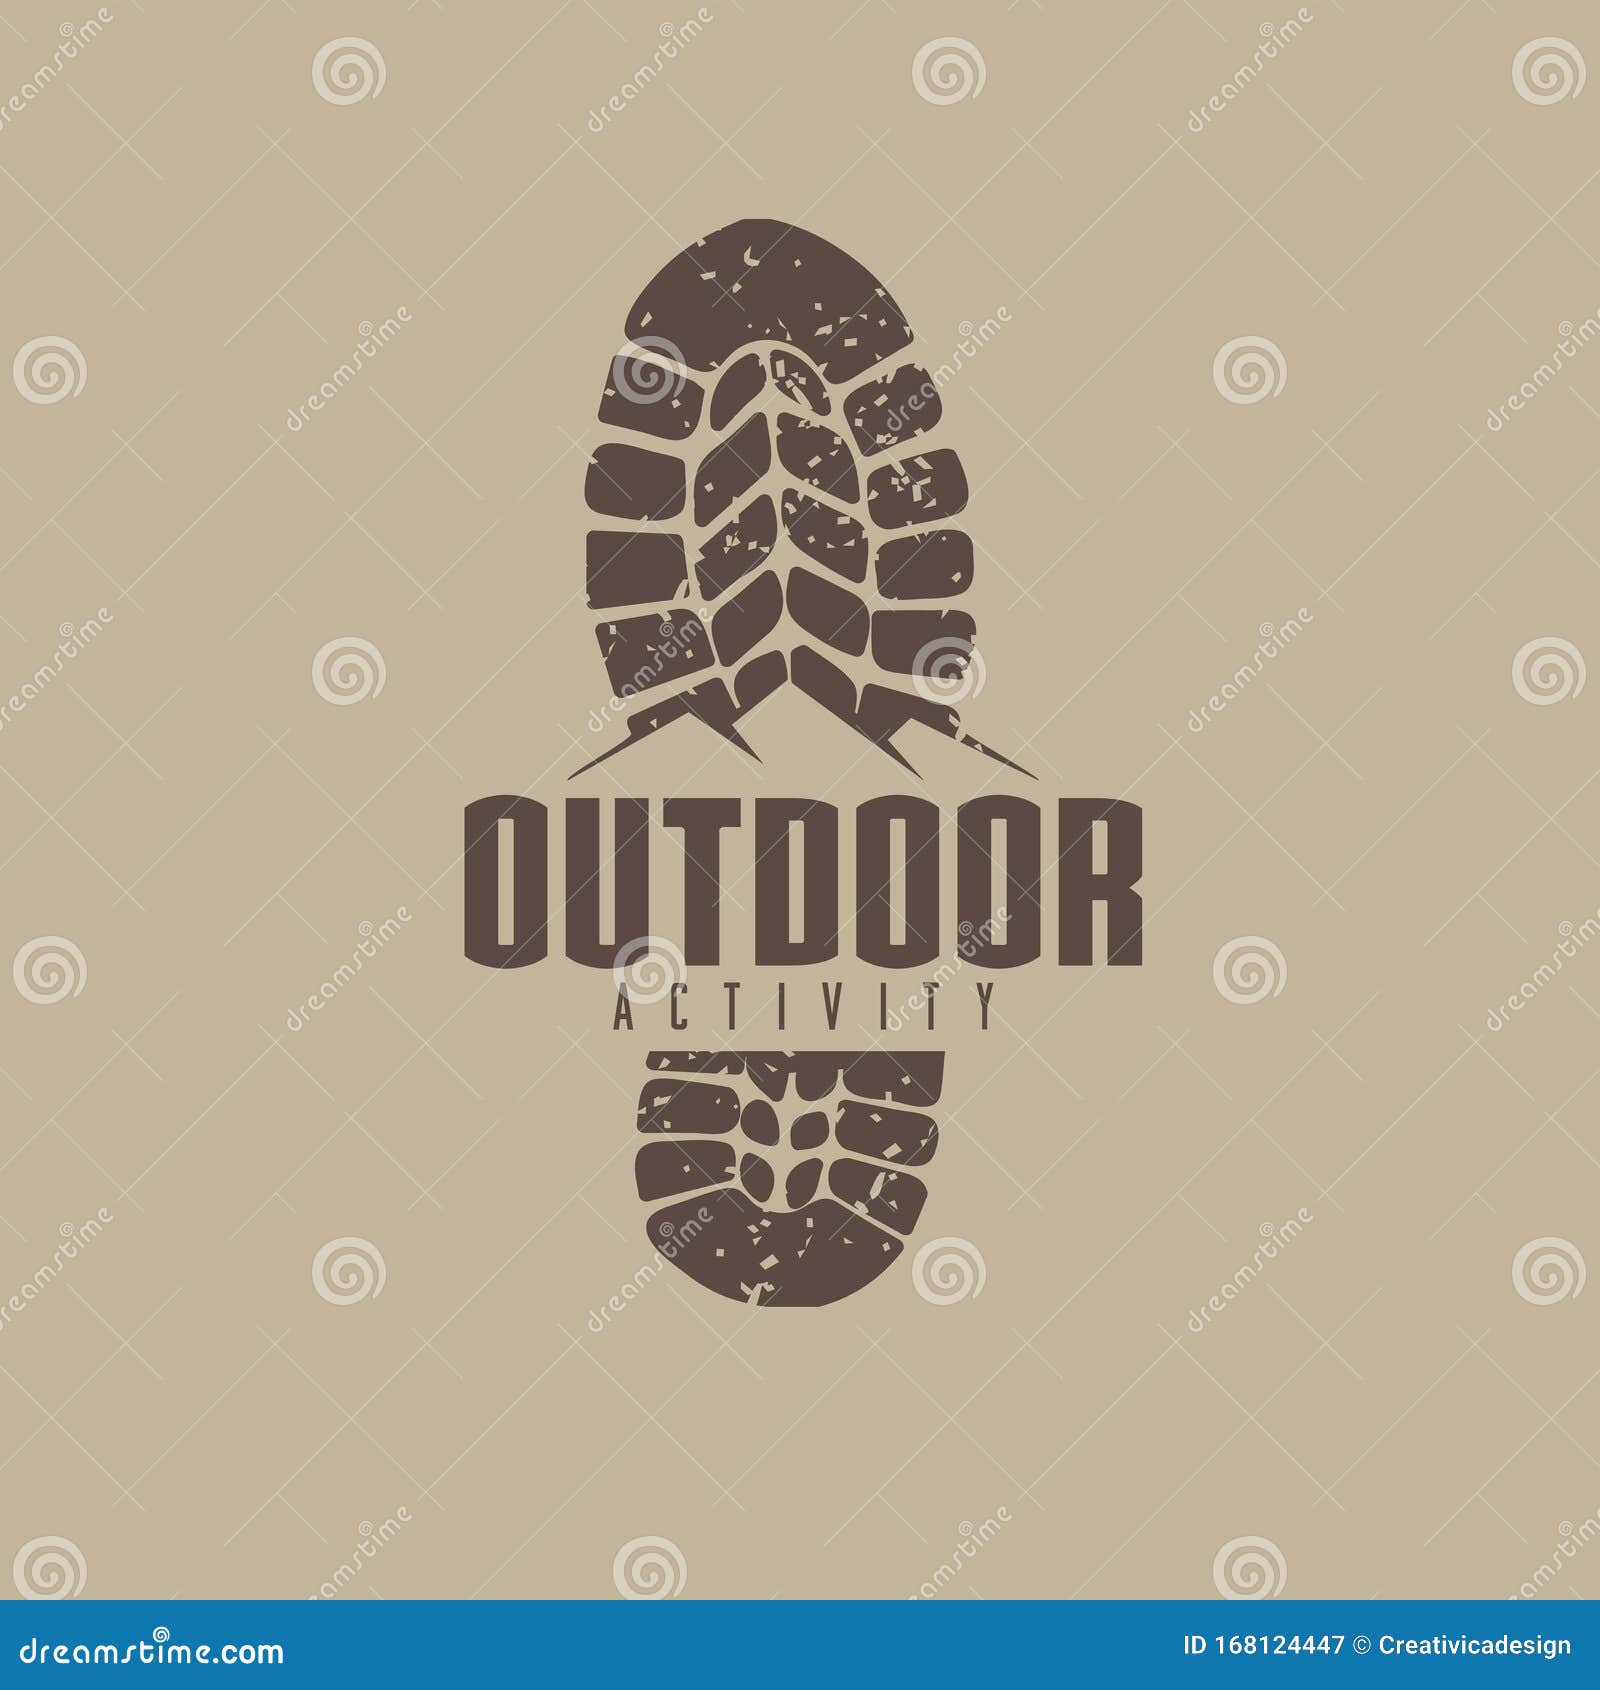 outdoor logo idea with boot track and mountain